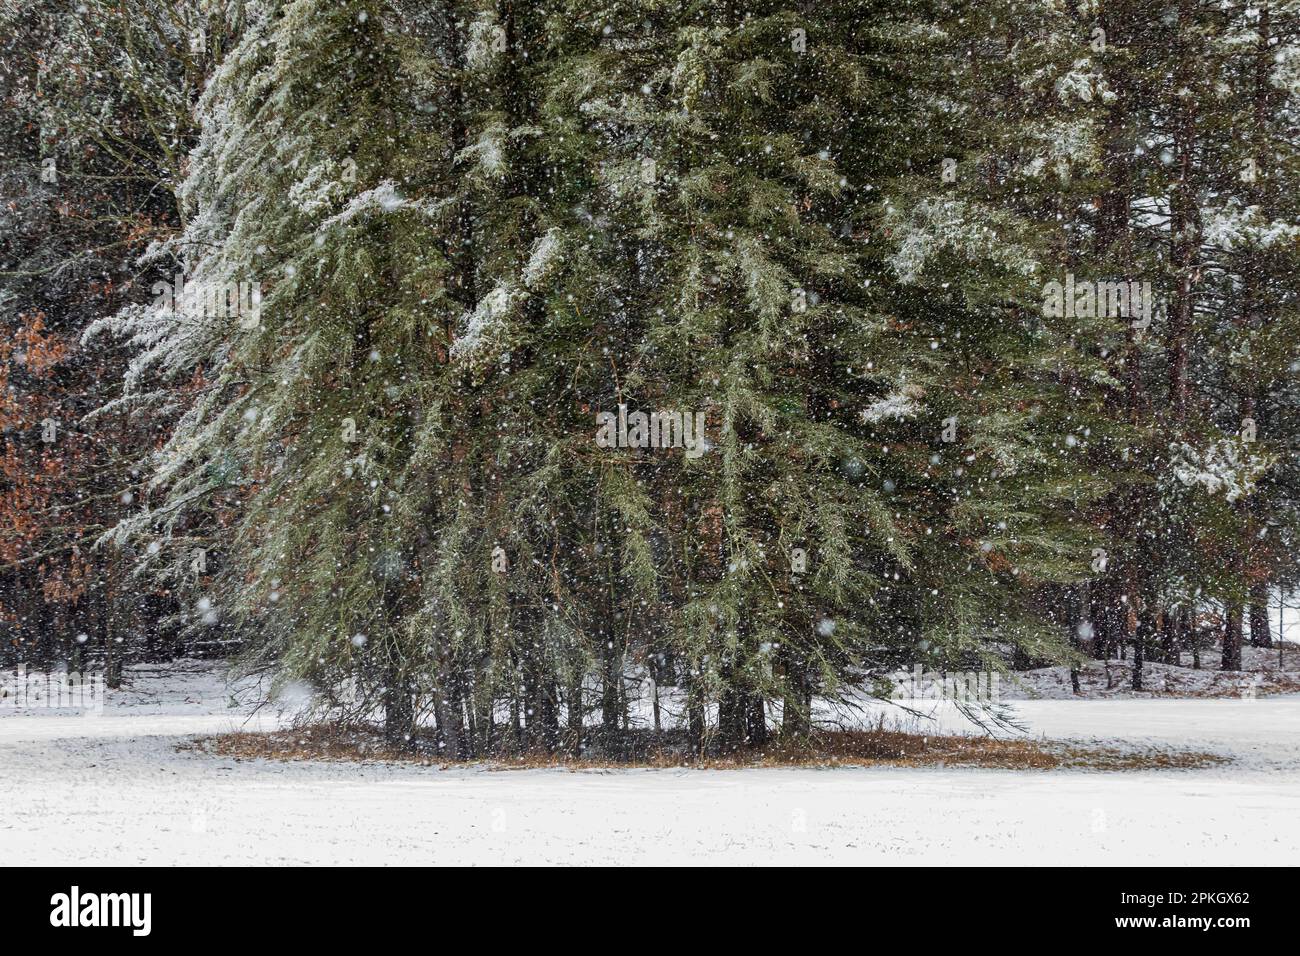 Ice storm coating Eastern White Pine, Pinus strobus, branches in Canadian Lakes community in March in central Michigan, USA Stock Photo